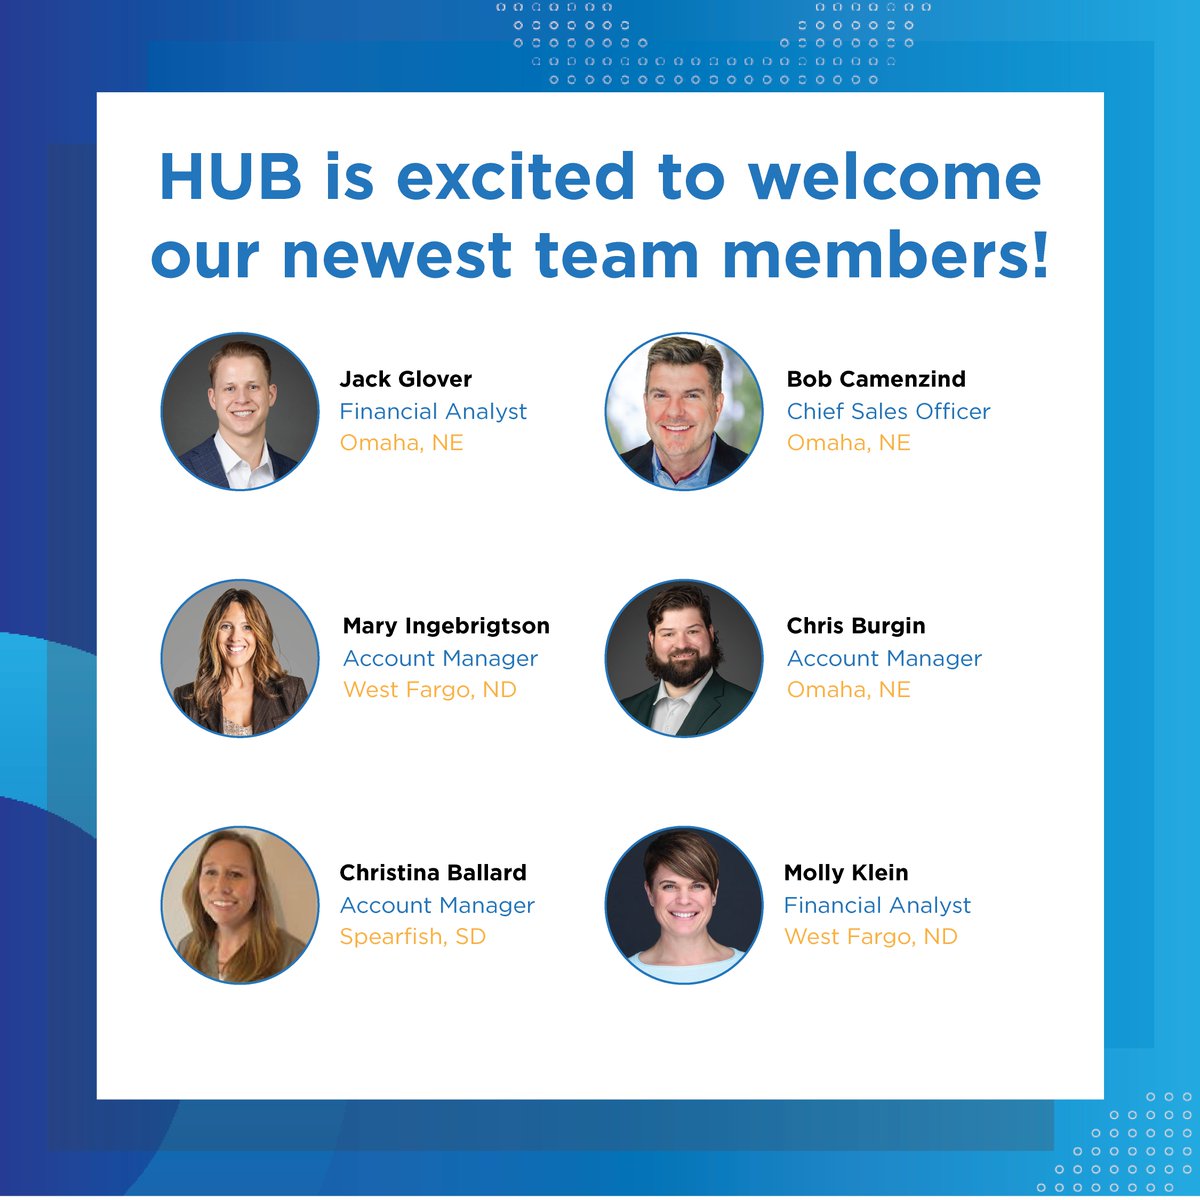 🌟 We've added some incredible talent to our team over the last few months. Join us in welcoming our new hires as they bring fresh perspectives and skills to help us deliver top-notch service to our clients. 🚀💼 #WelcomeAboard #LifeatHUB